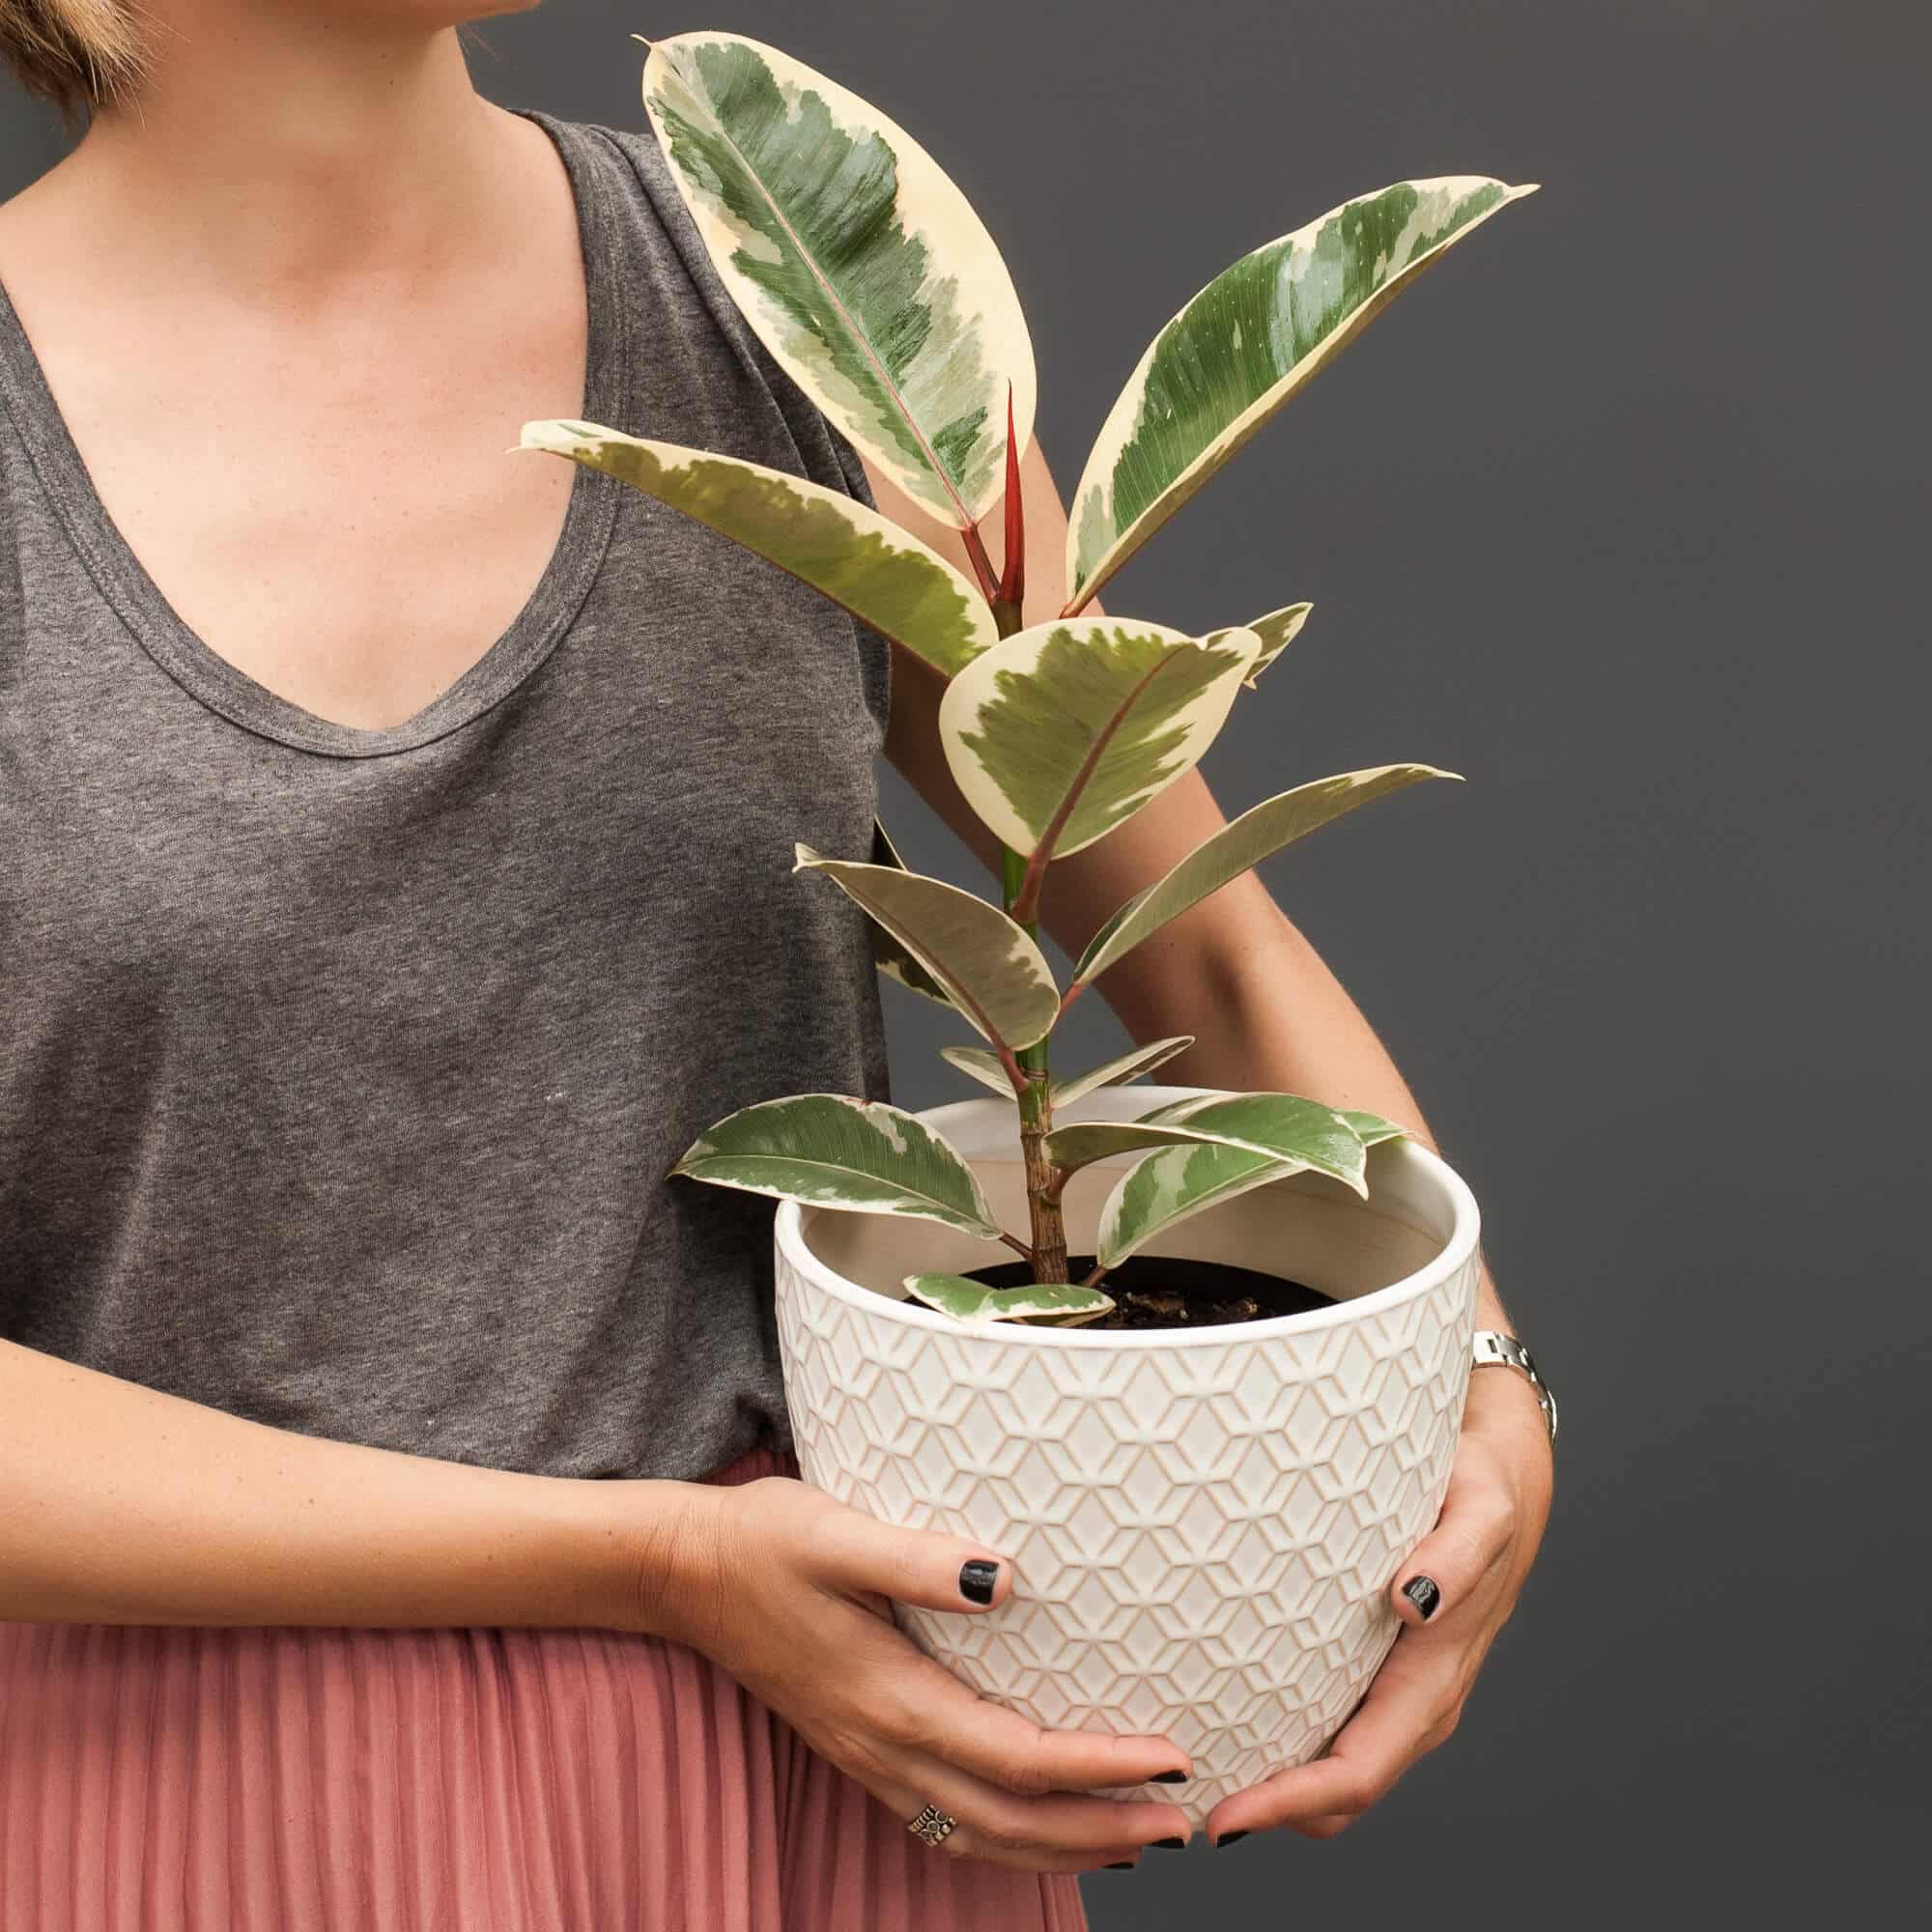 A woman holding a white decorative planter containing a variegated rubber plant, with her grey shirt visible.